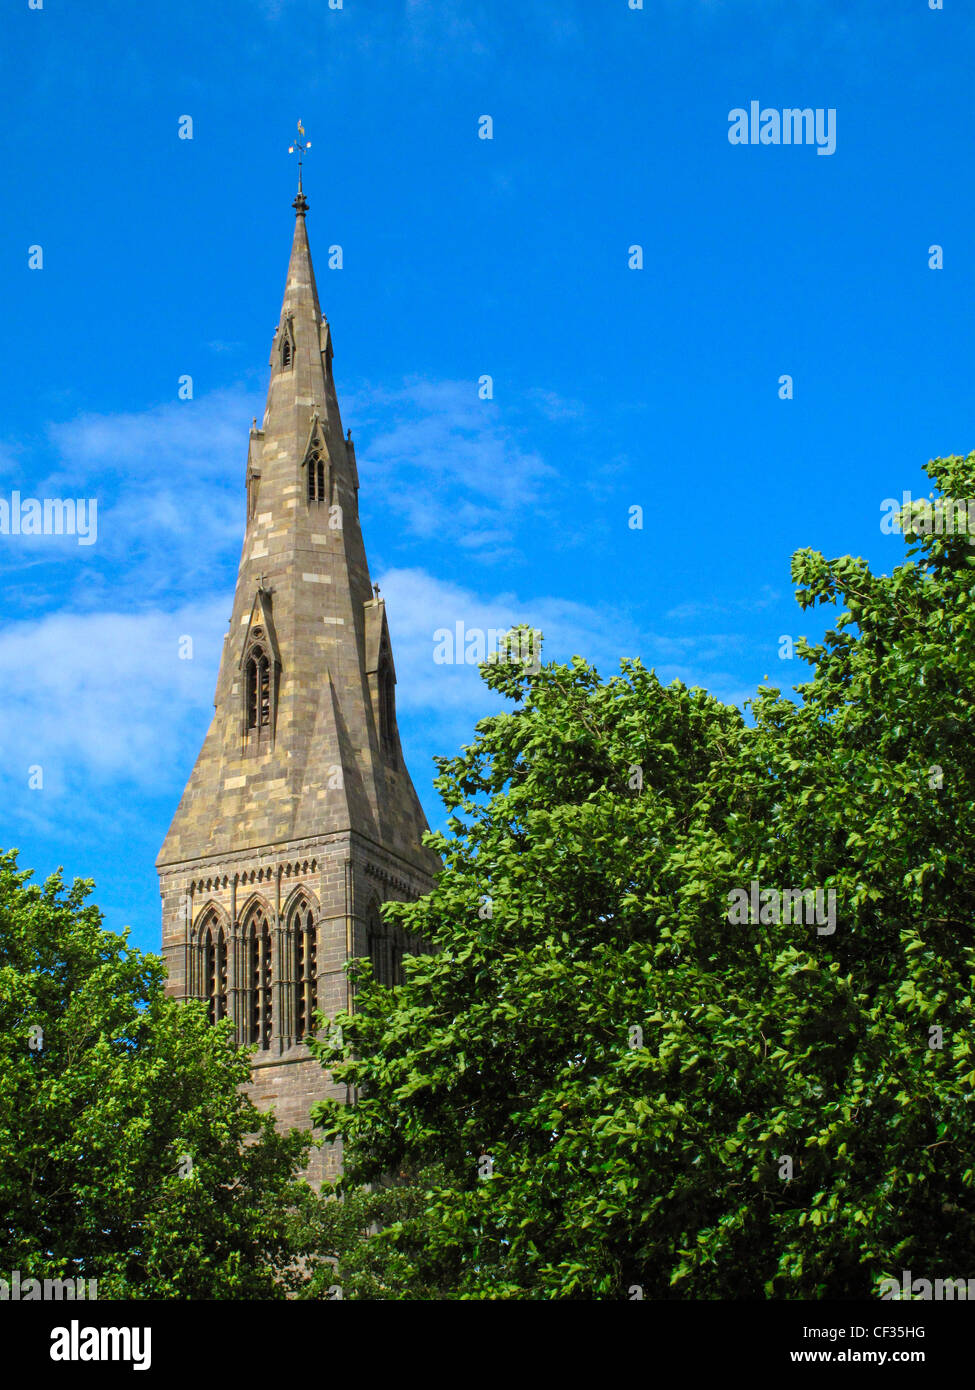 The steeple of Leicester Cathedral, or the Cathedral Church of St Martin. It is the fourth smallest Anglican cathedral in Englan Stock Photo